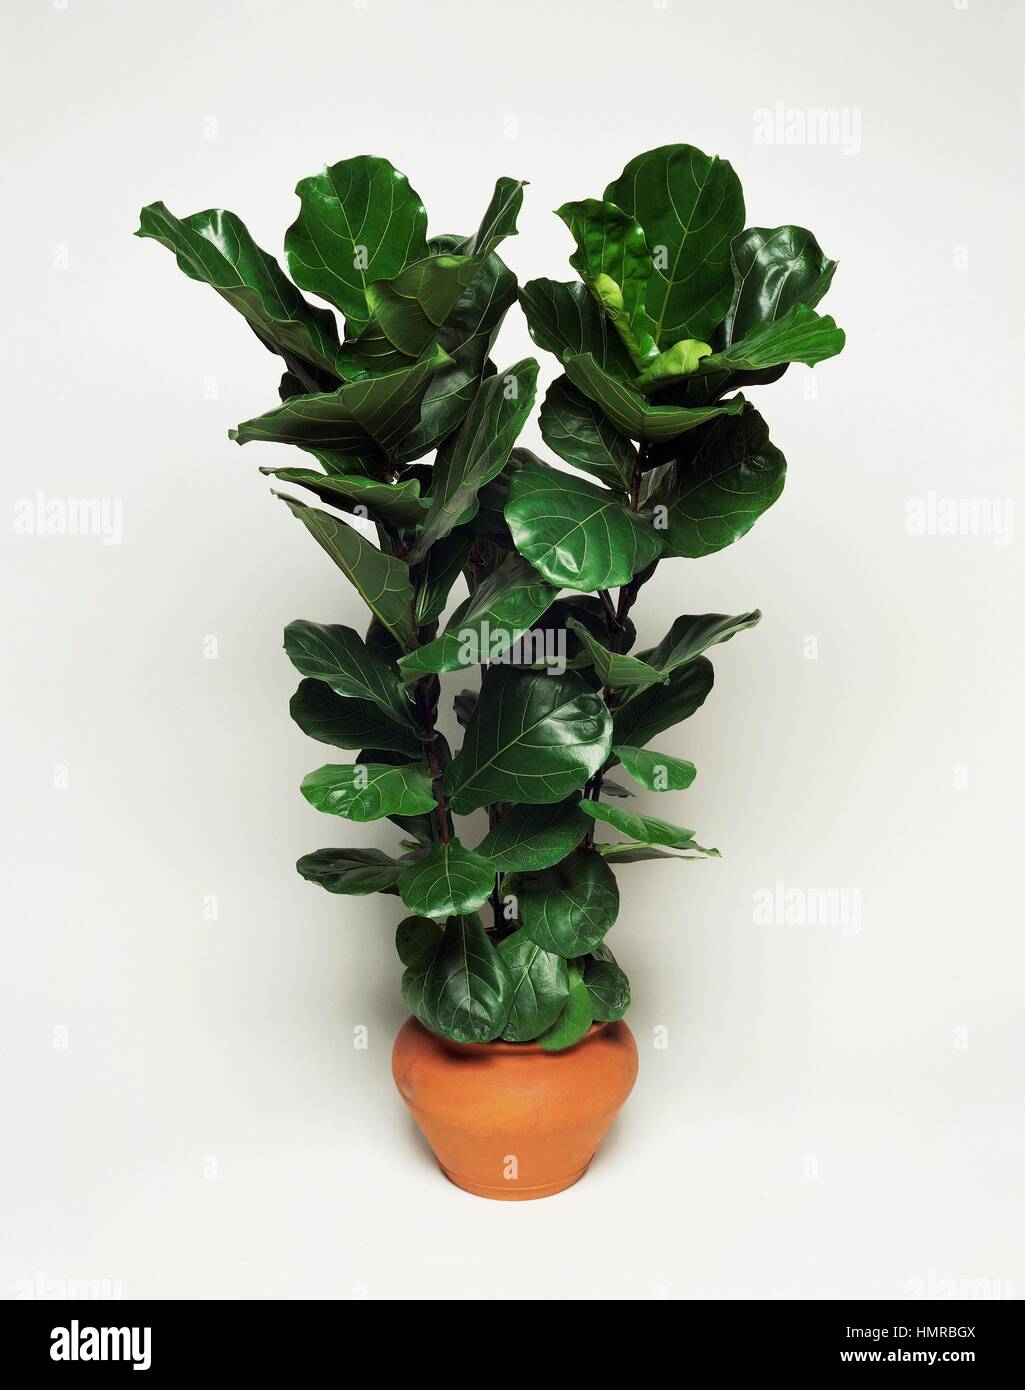 Fiddle Leaf Fig Ficus Lyrata Moraceae Stock Photo Alamy,What Are Scallops Made Out Of